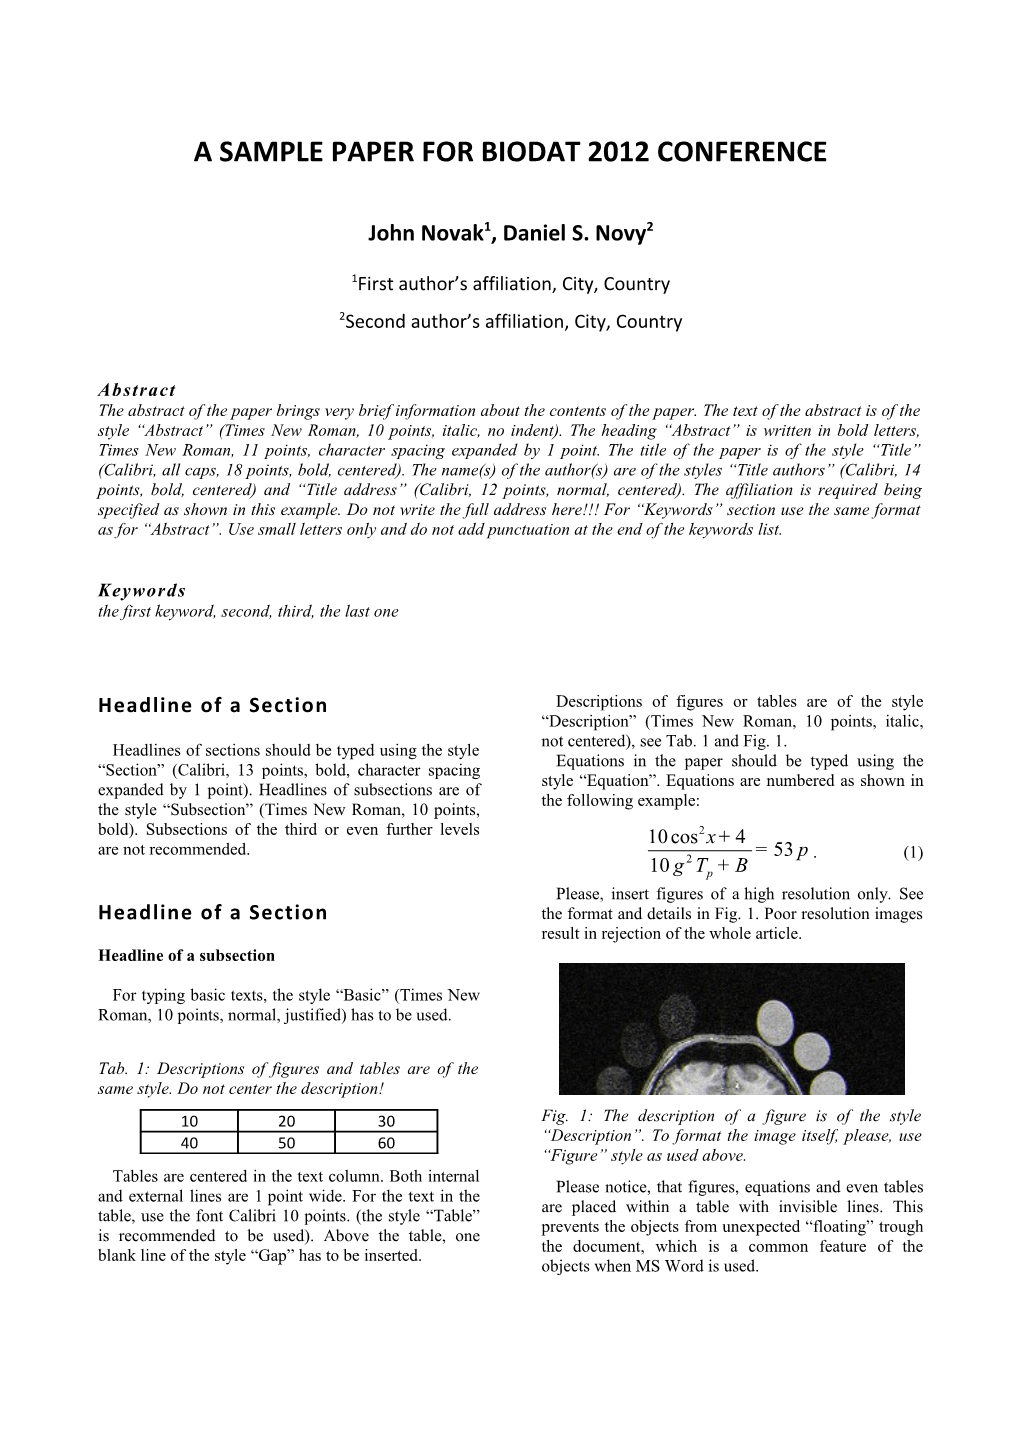 A Sample Paper for Biodat 2012 Conference